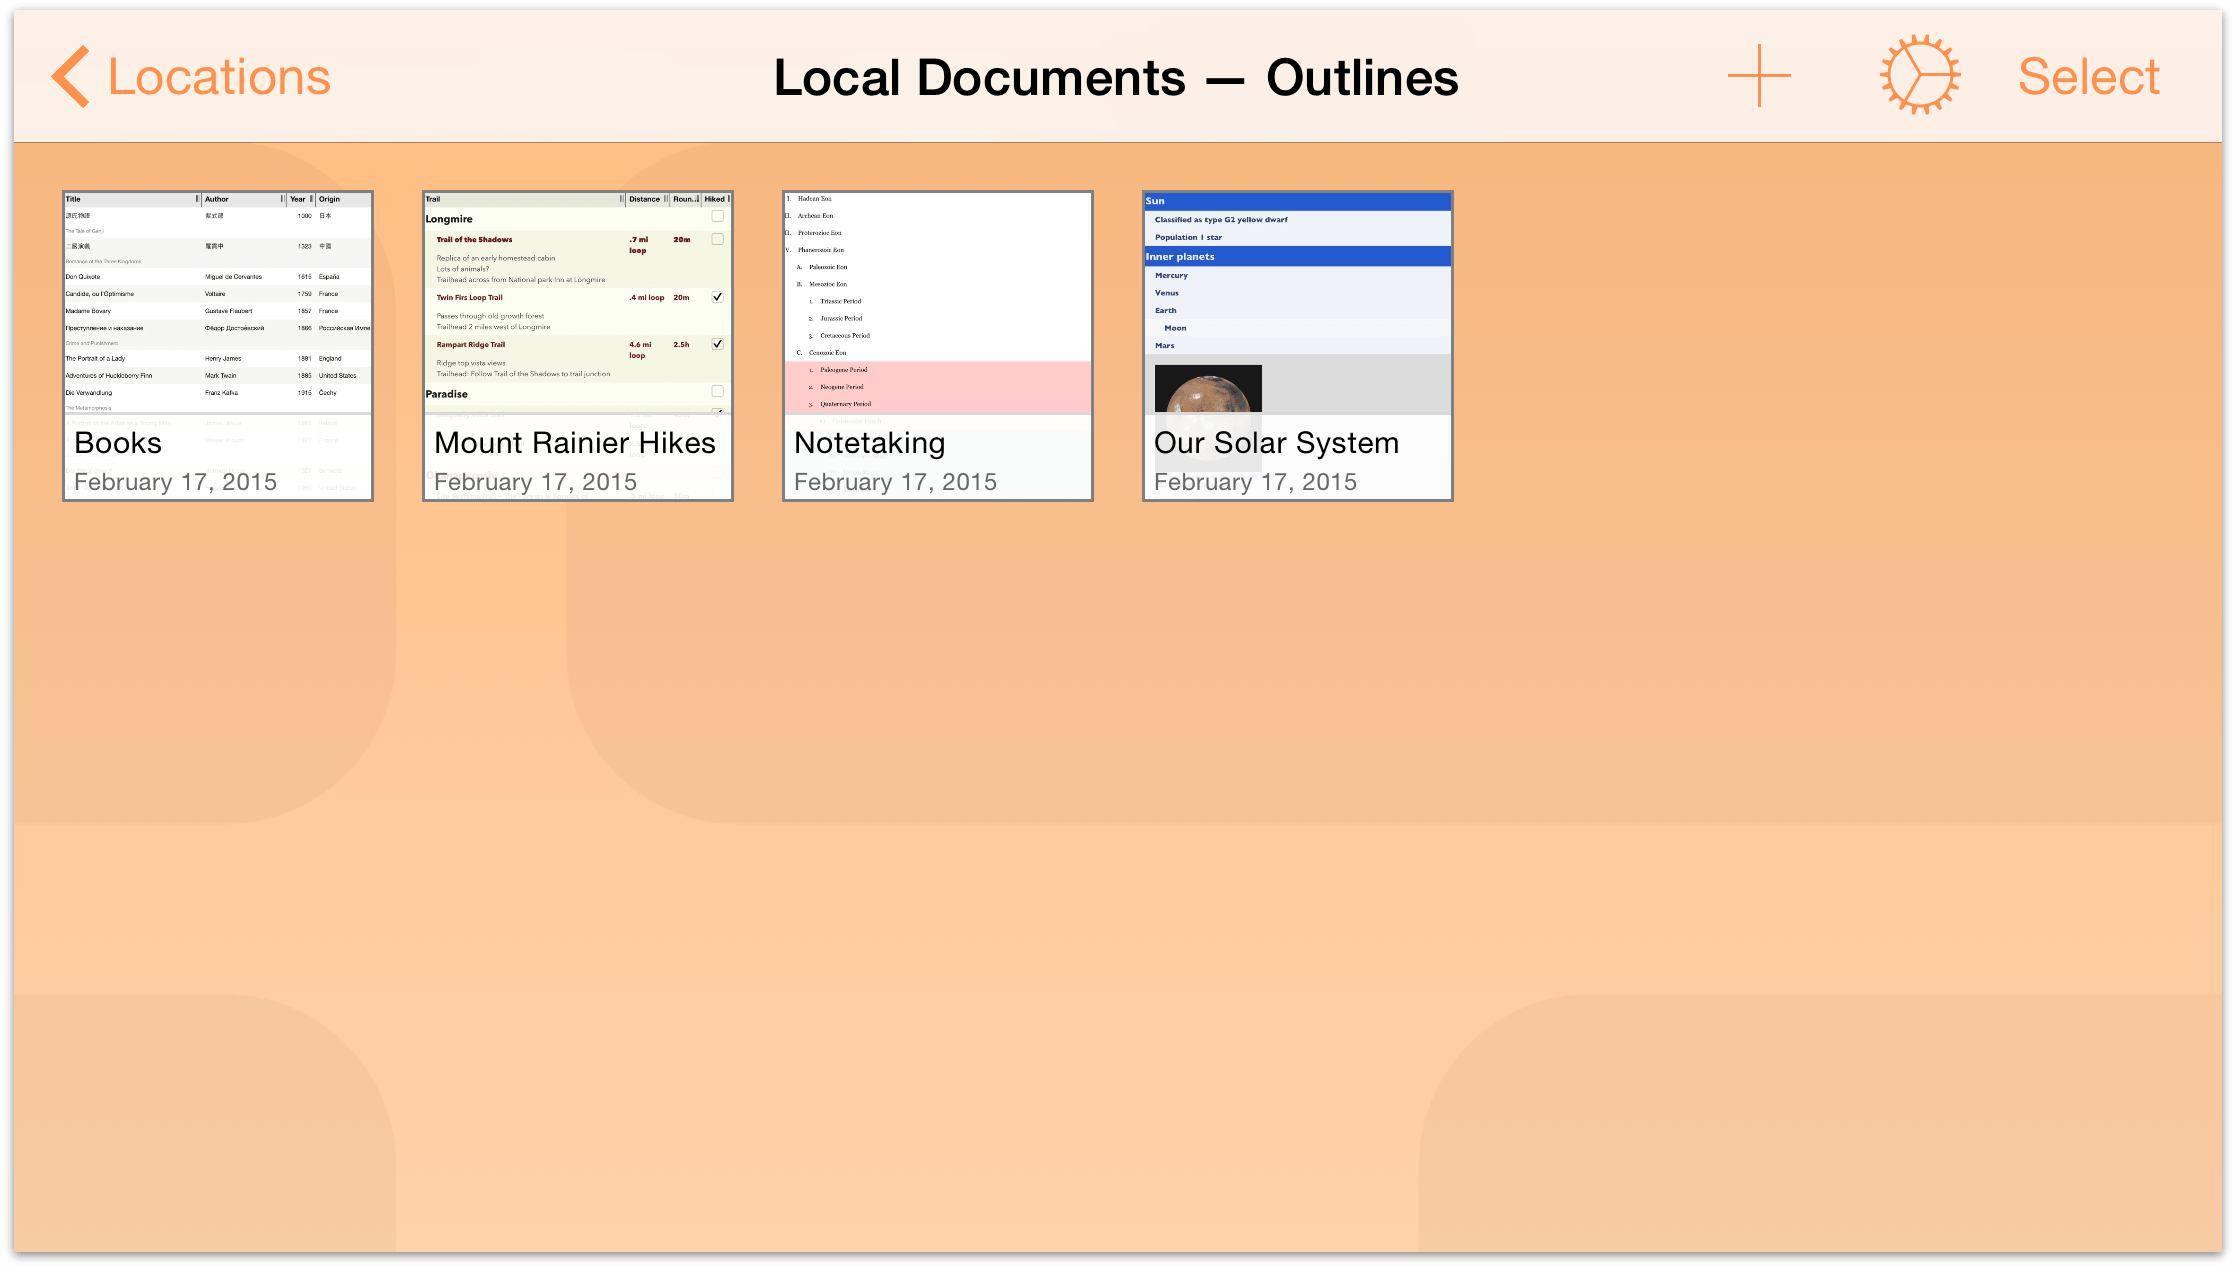 The files inside the Local Documents folder